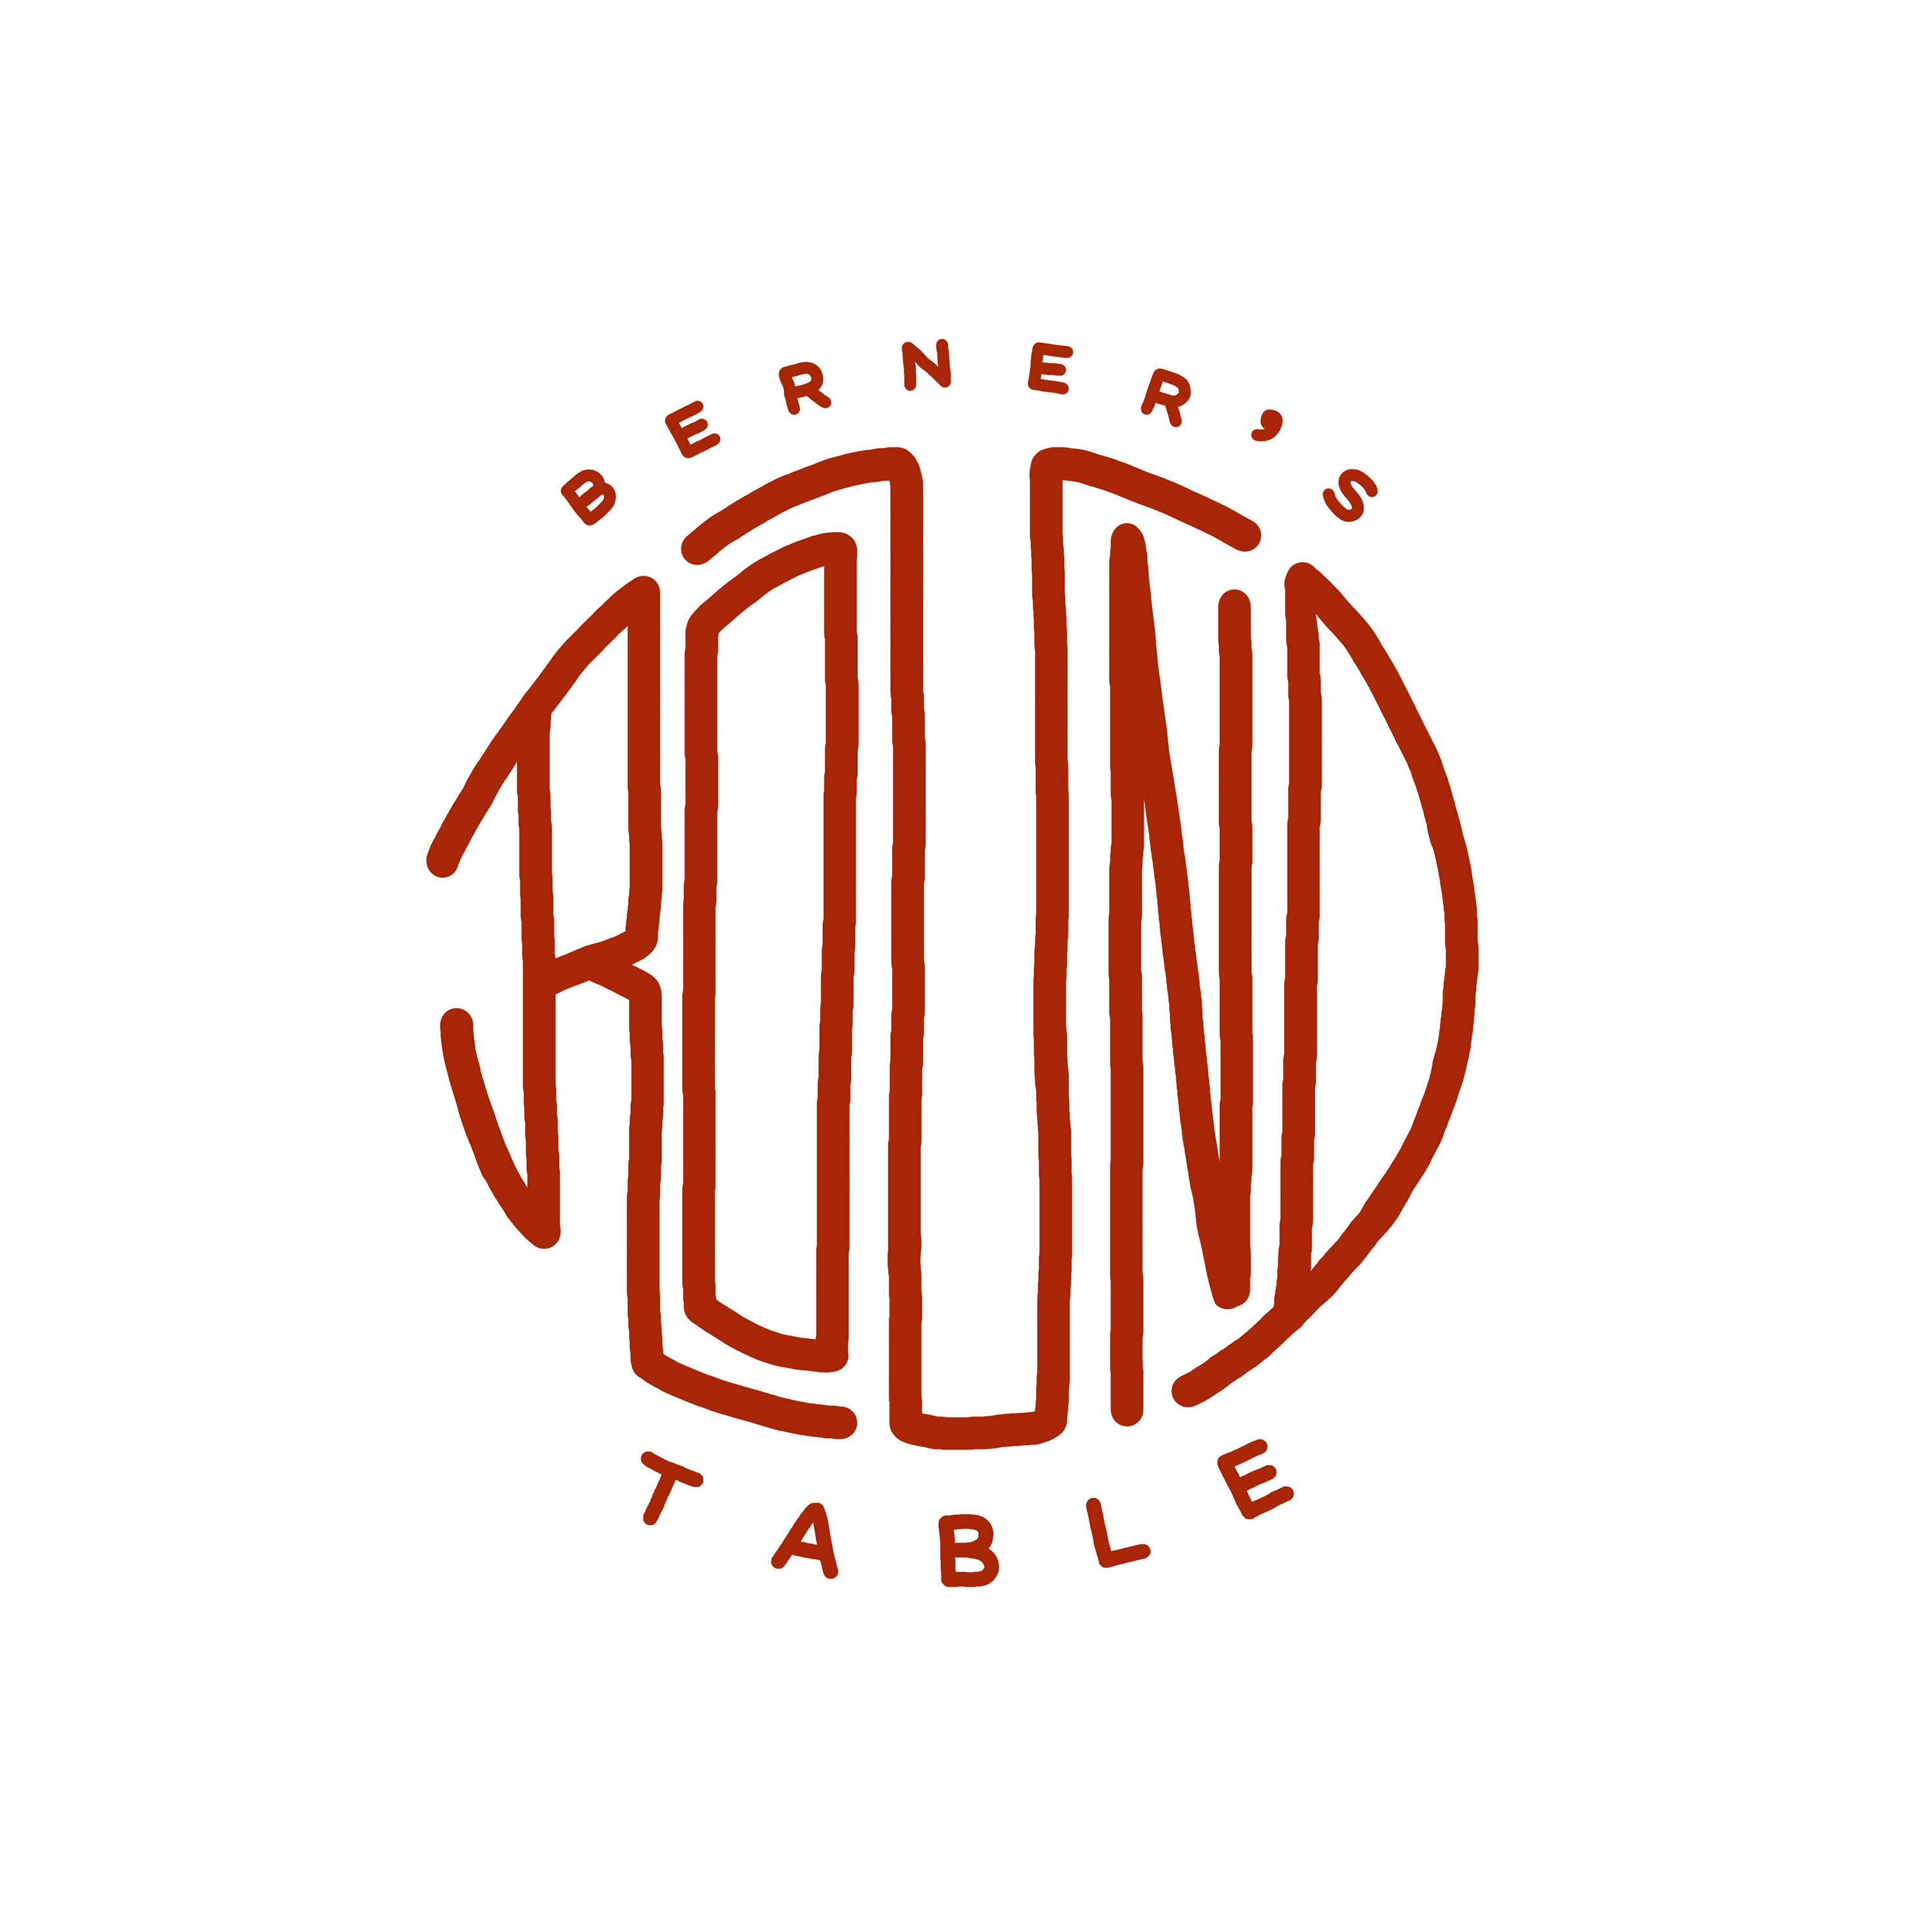 Berner's Round Table Podcast